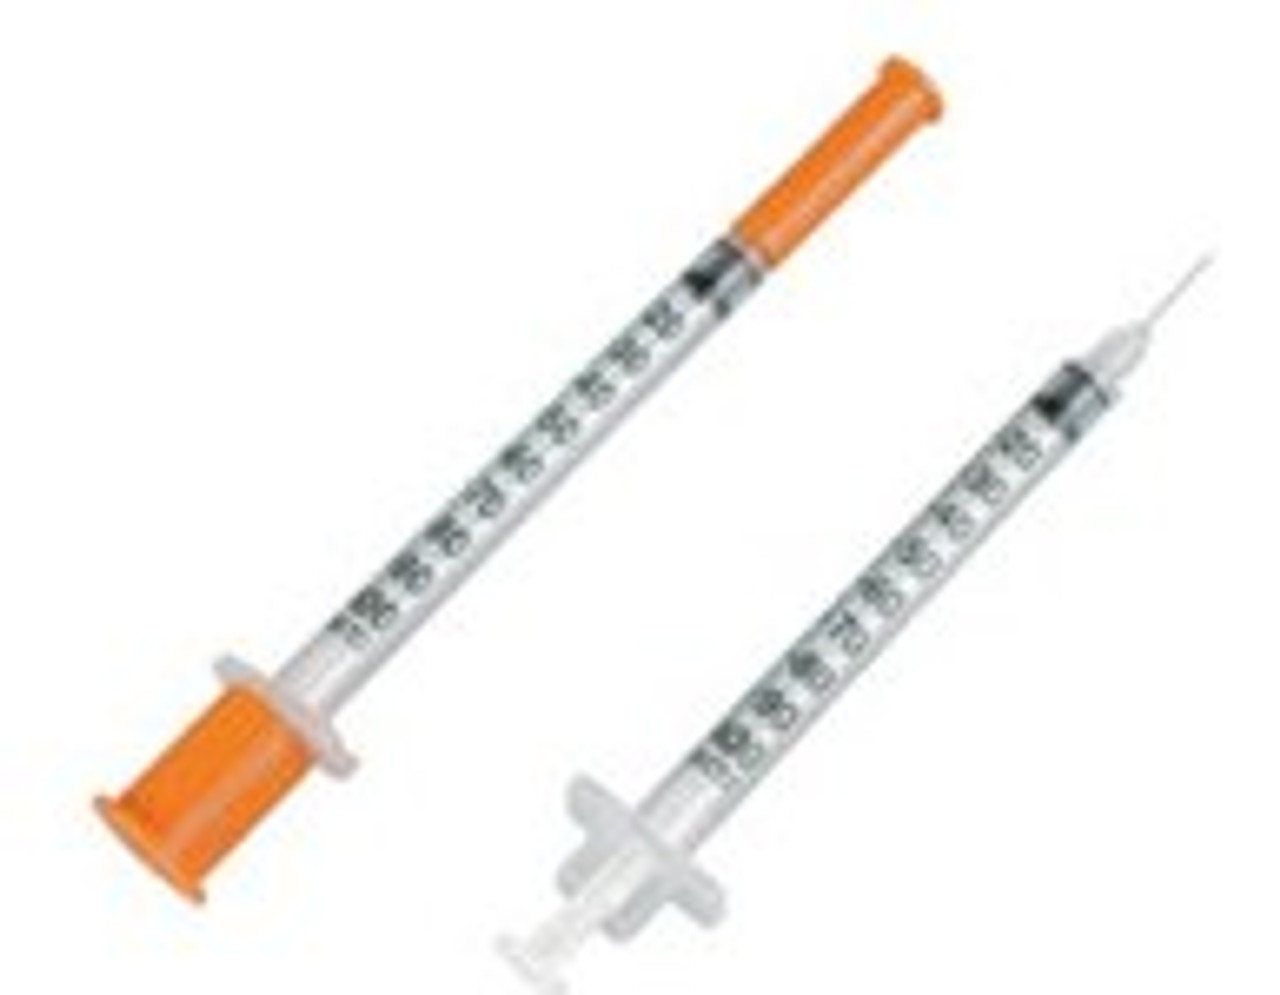 Insulin Syringes with Permanently Attached Needles, BD Medical